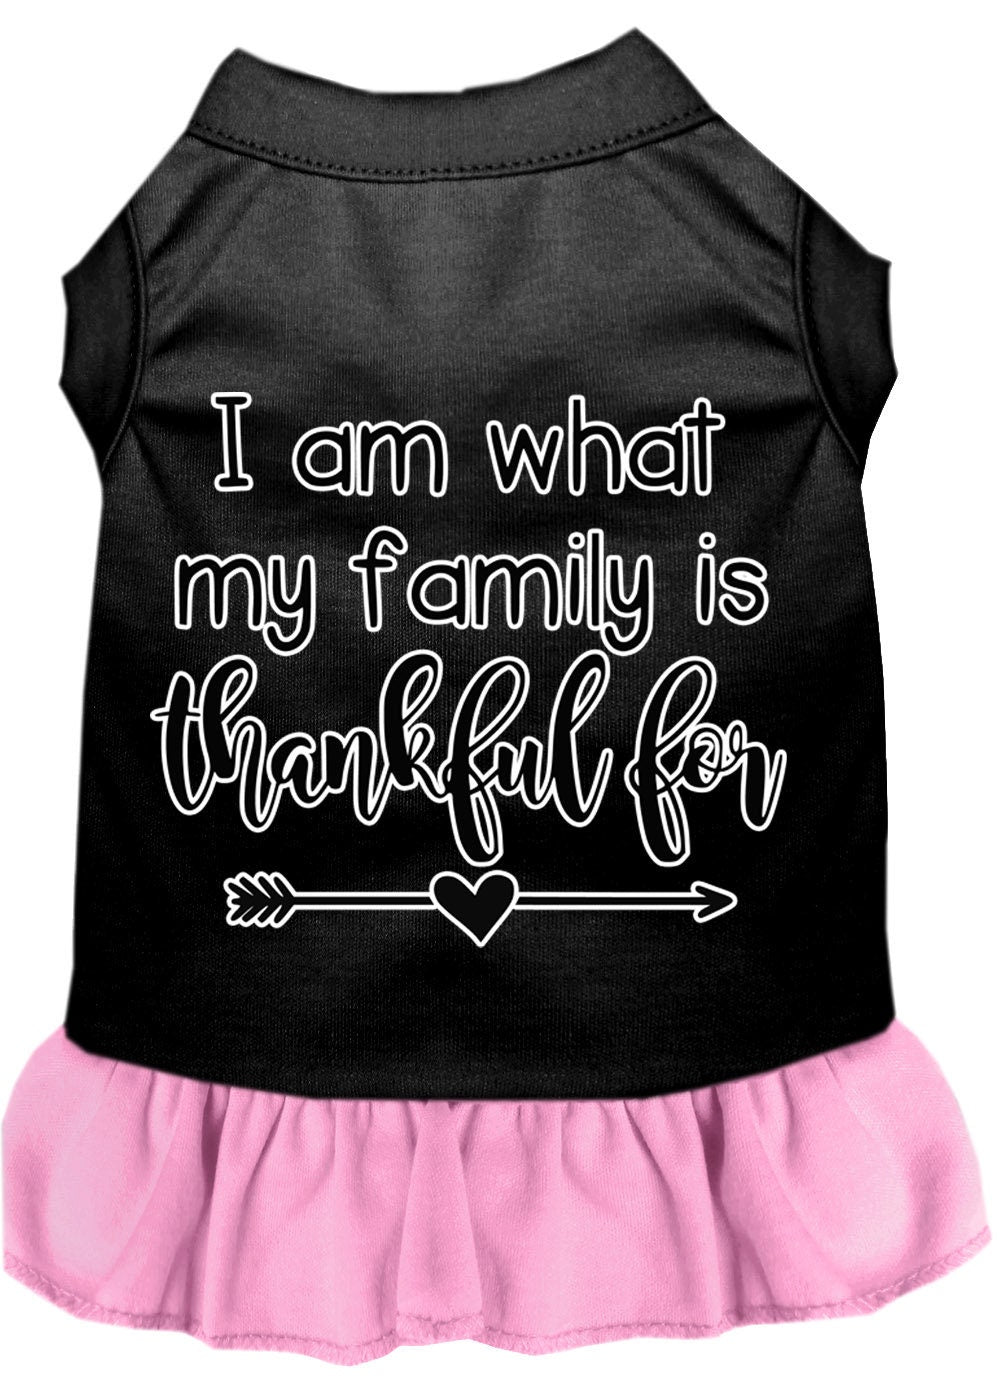 Pet Dog & Cat Dress Screen Printed, "I Am What My Family Is Thankful For"